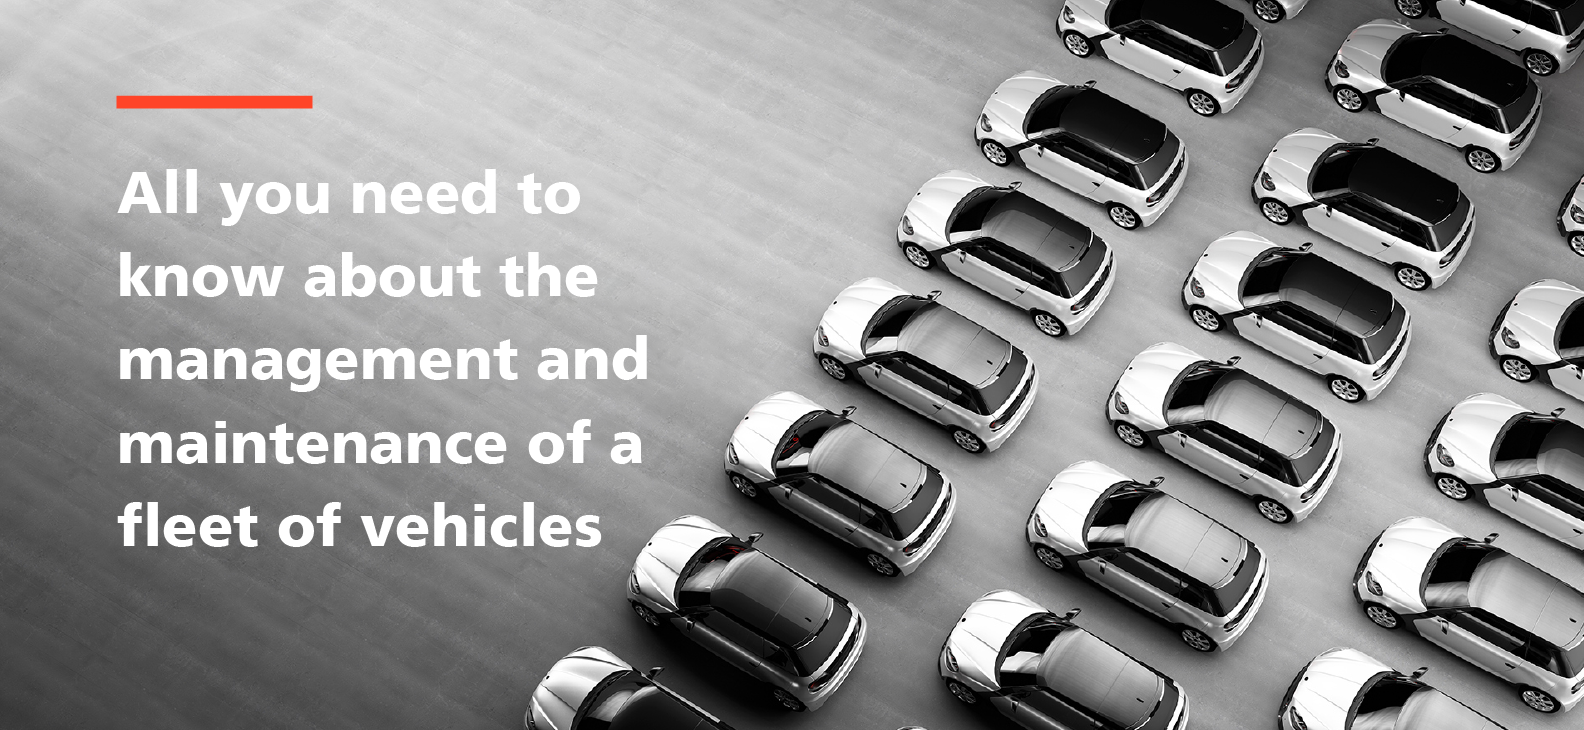 All you need to know about the management and maintenance of a fleet of vehicles